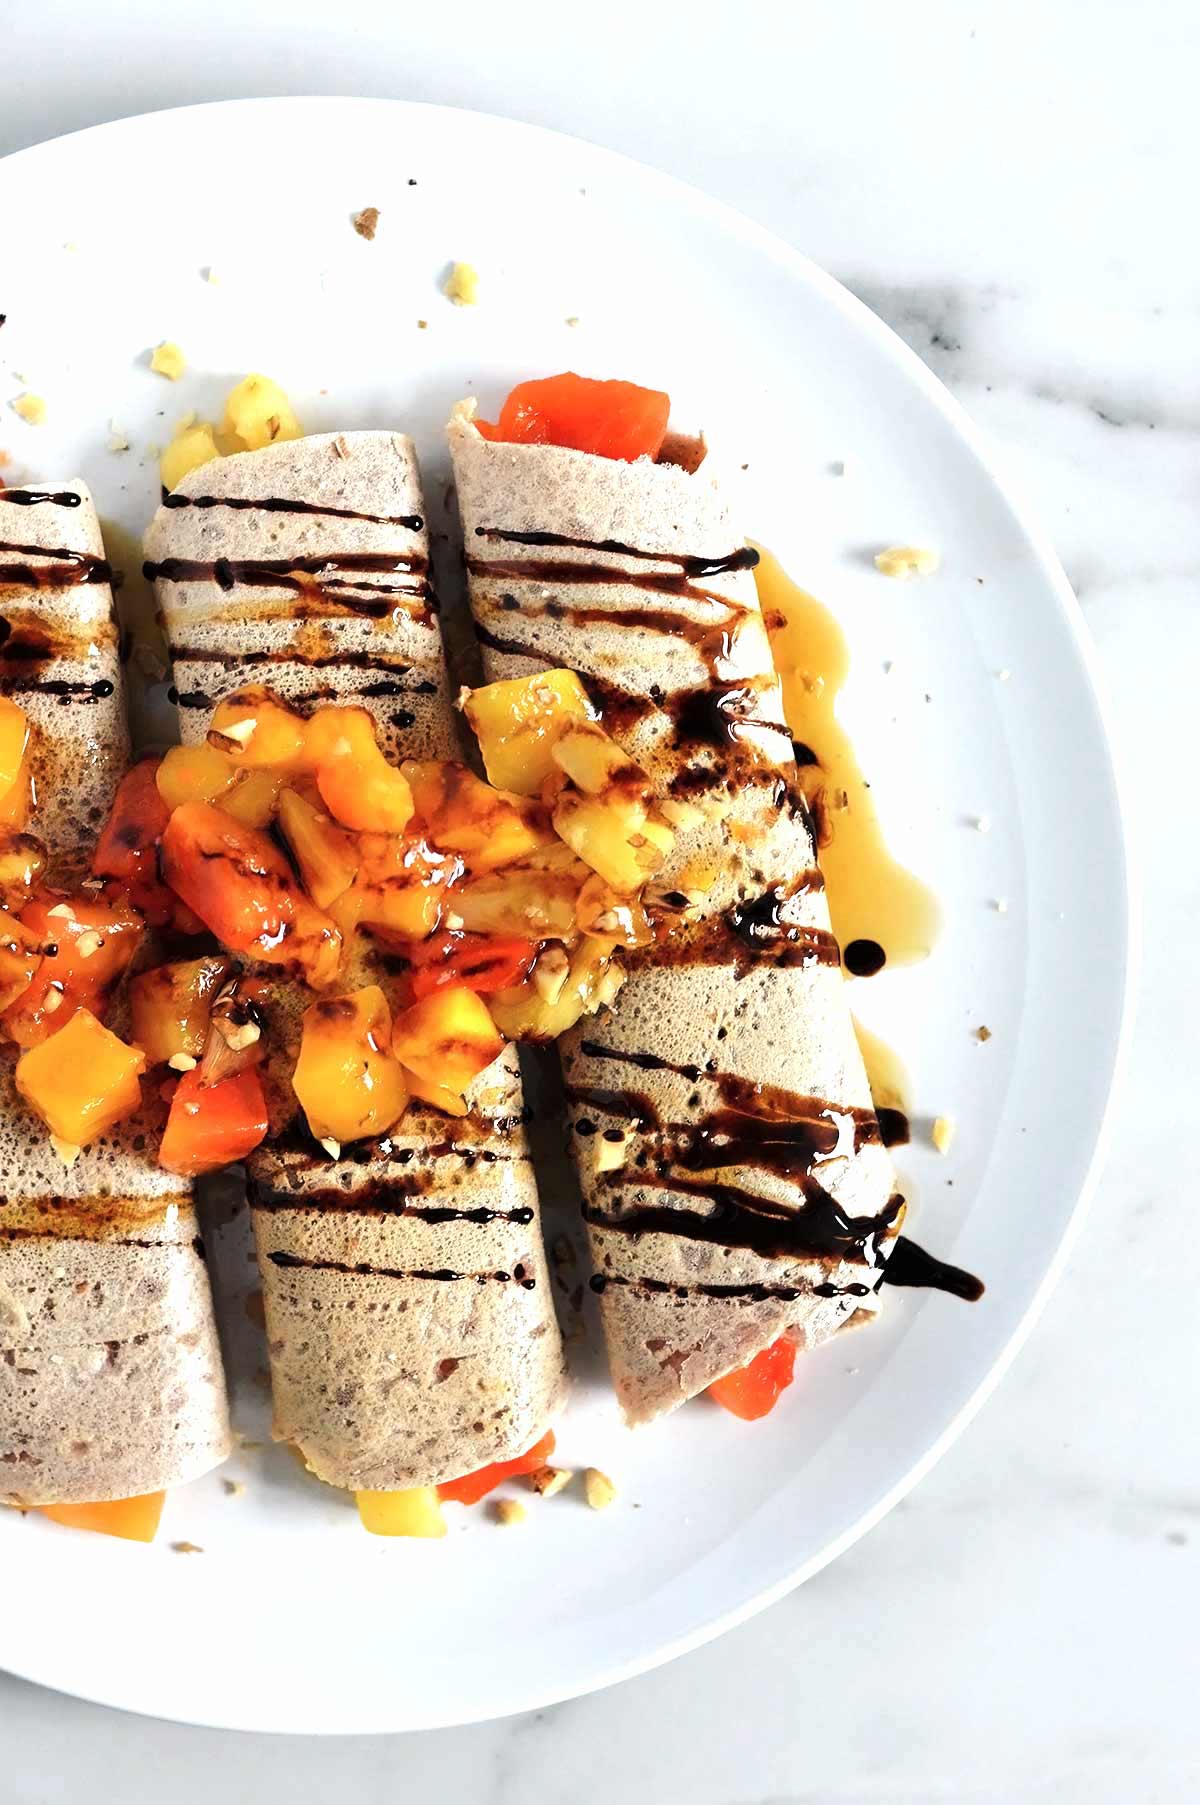 gluten-free buckwheat crêpes topped with fruit and molasses